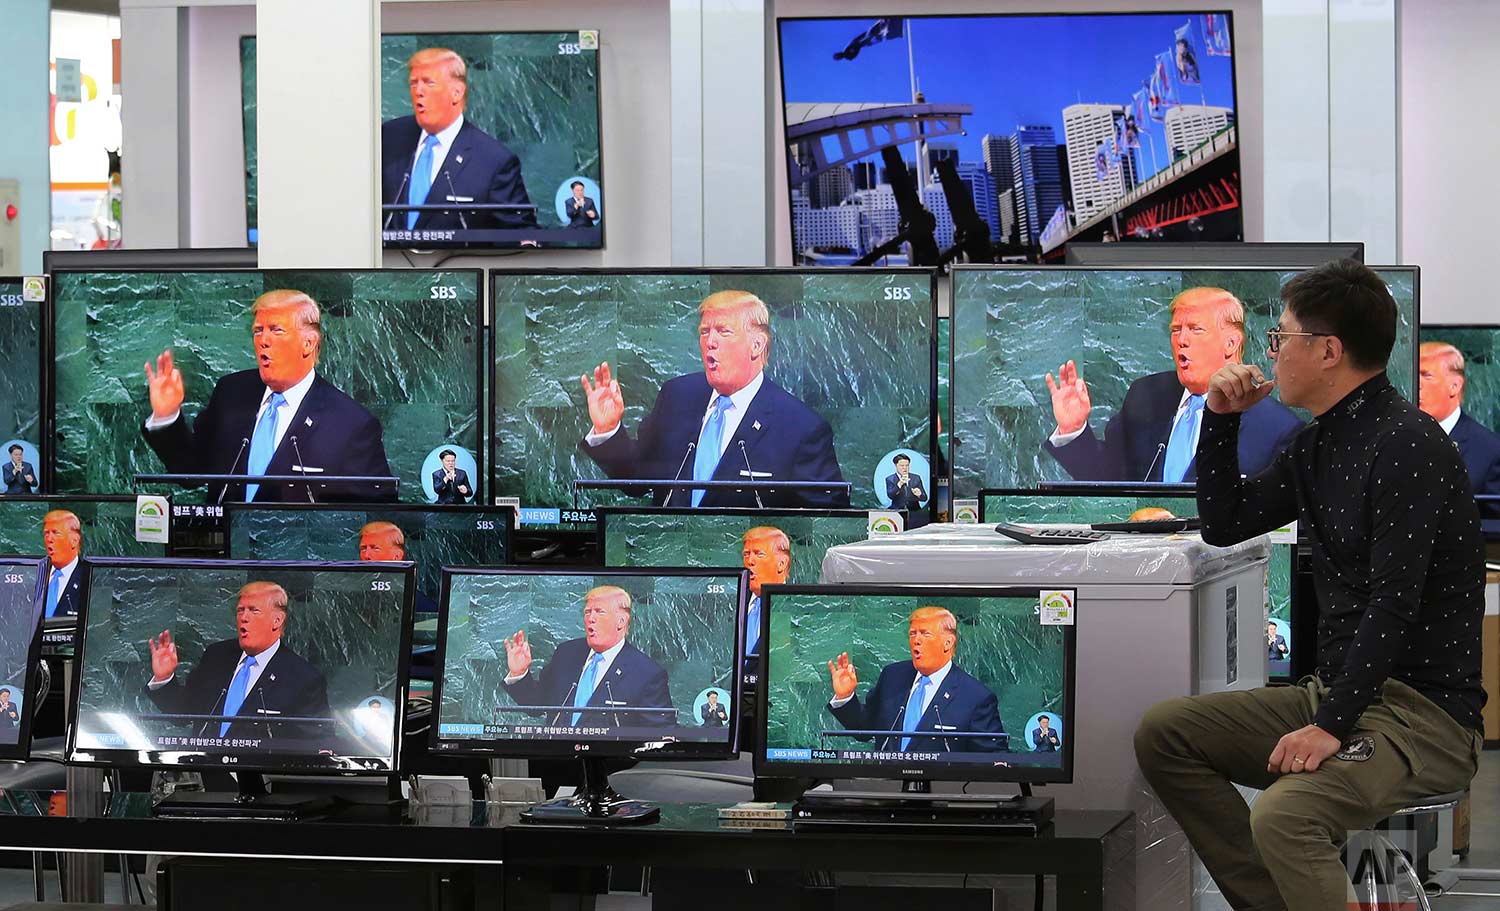 Television screens show a news program with an image of U.S. President Donald Trump during his address at the U.N. General Assembly, at the Yongsan Electronic Market in Seoul, South Korea, Wednesday, Sept. 20, 2017. On Friday, Sept. 22, 2017. North Korean leader Kim Jong Un lobbed a string of insults at Trump, calling him a "mentally deranged U.S. dotard" and hinting at a frightening new weapon test. (AP Photo/Ahn Young-joon)